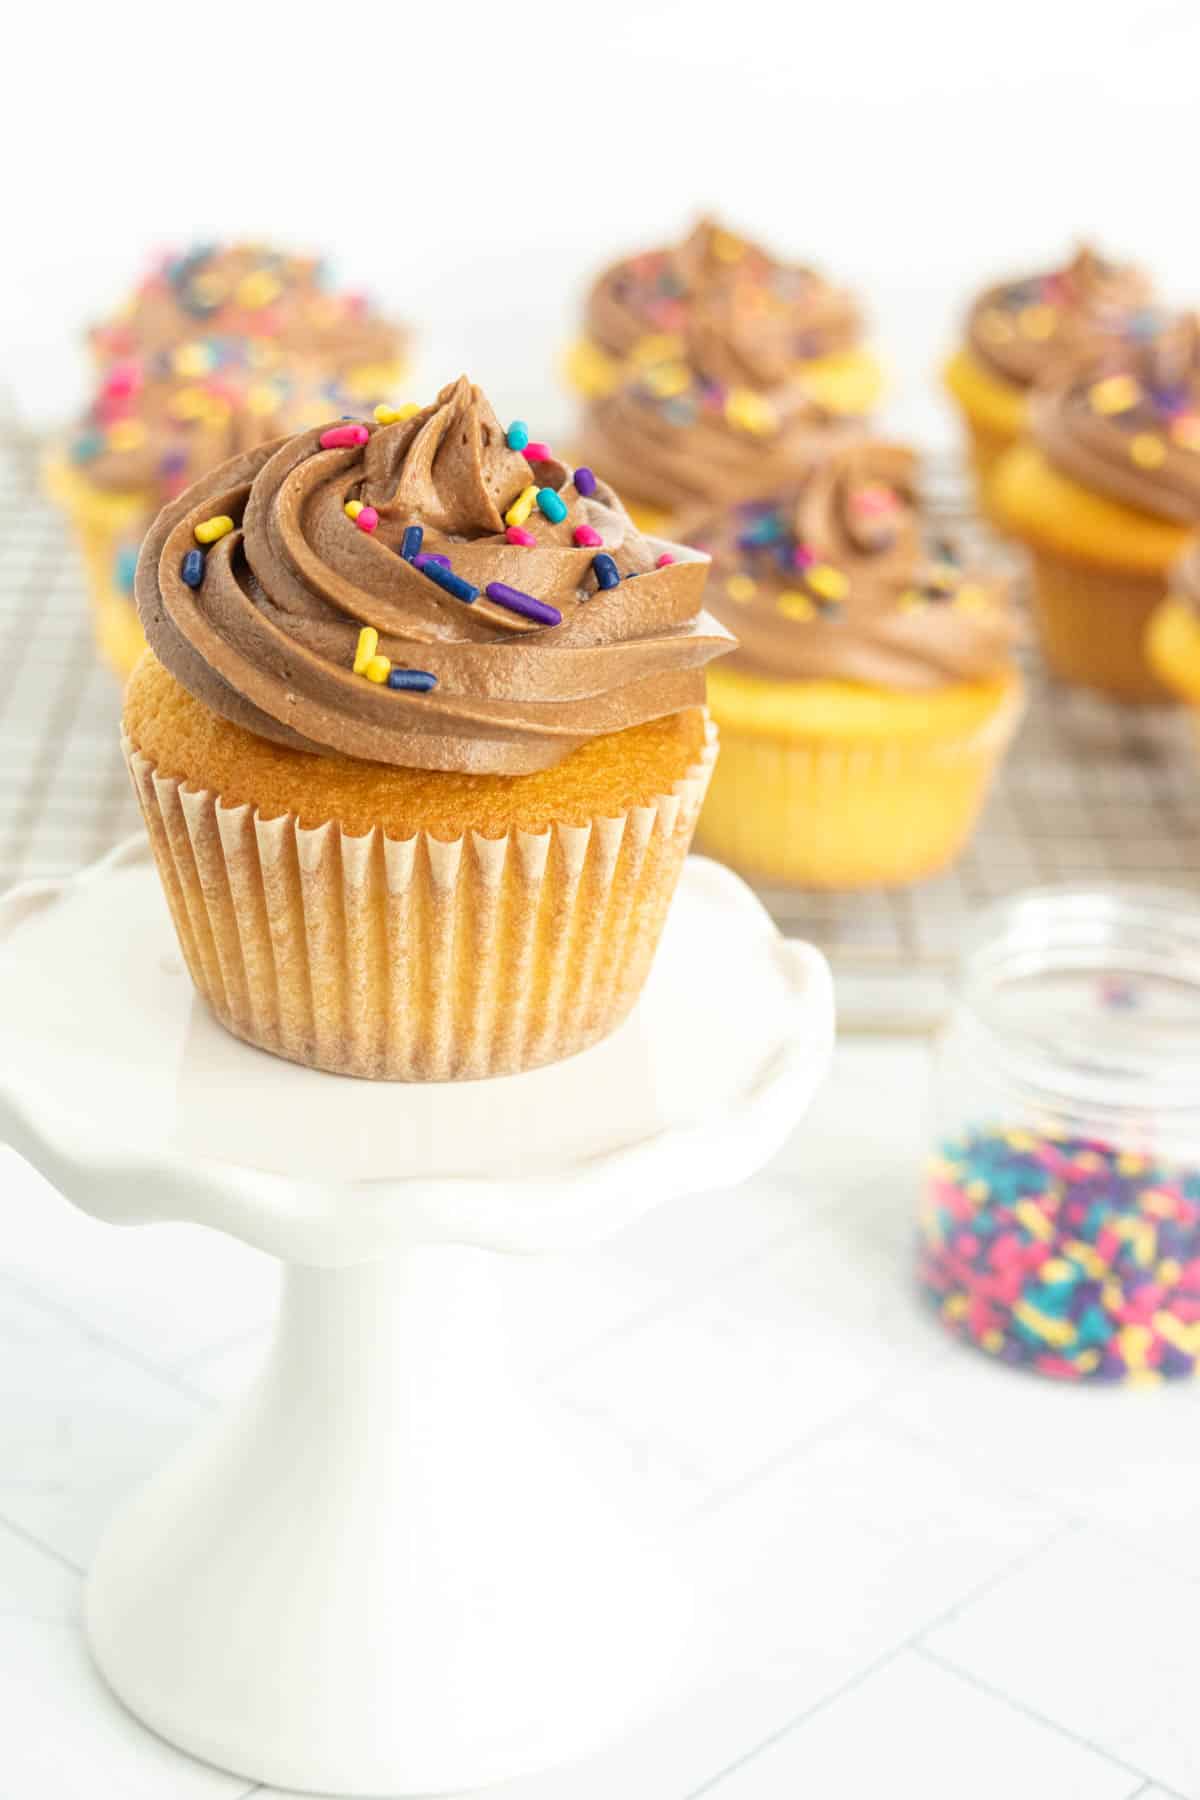 A vanilla cupcake with chocolate frosting and colorful sprinkles on a white stand, with more cupcakes and a jar of sprinkles in the background.